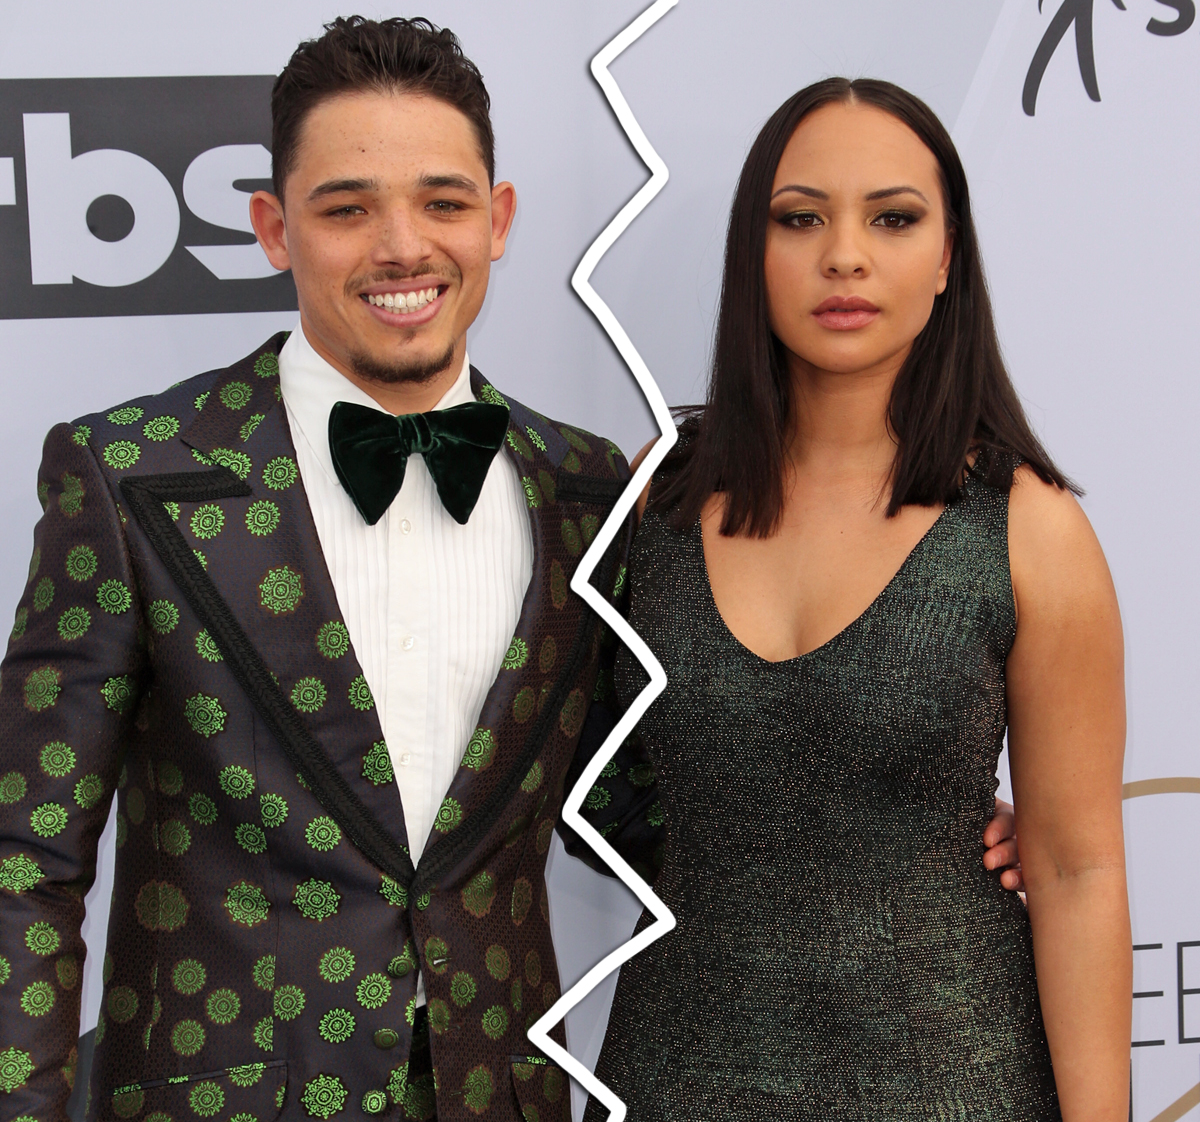 Hamilton Heartbreak! Jasmine Cephas Jones Dumps Anthony Ramos After 6 Years Together Following Cheating Accusation!